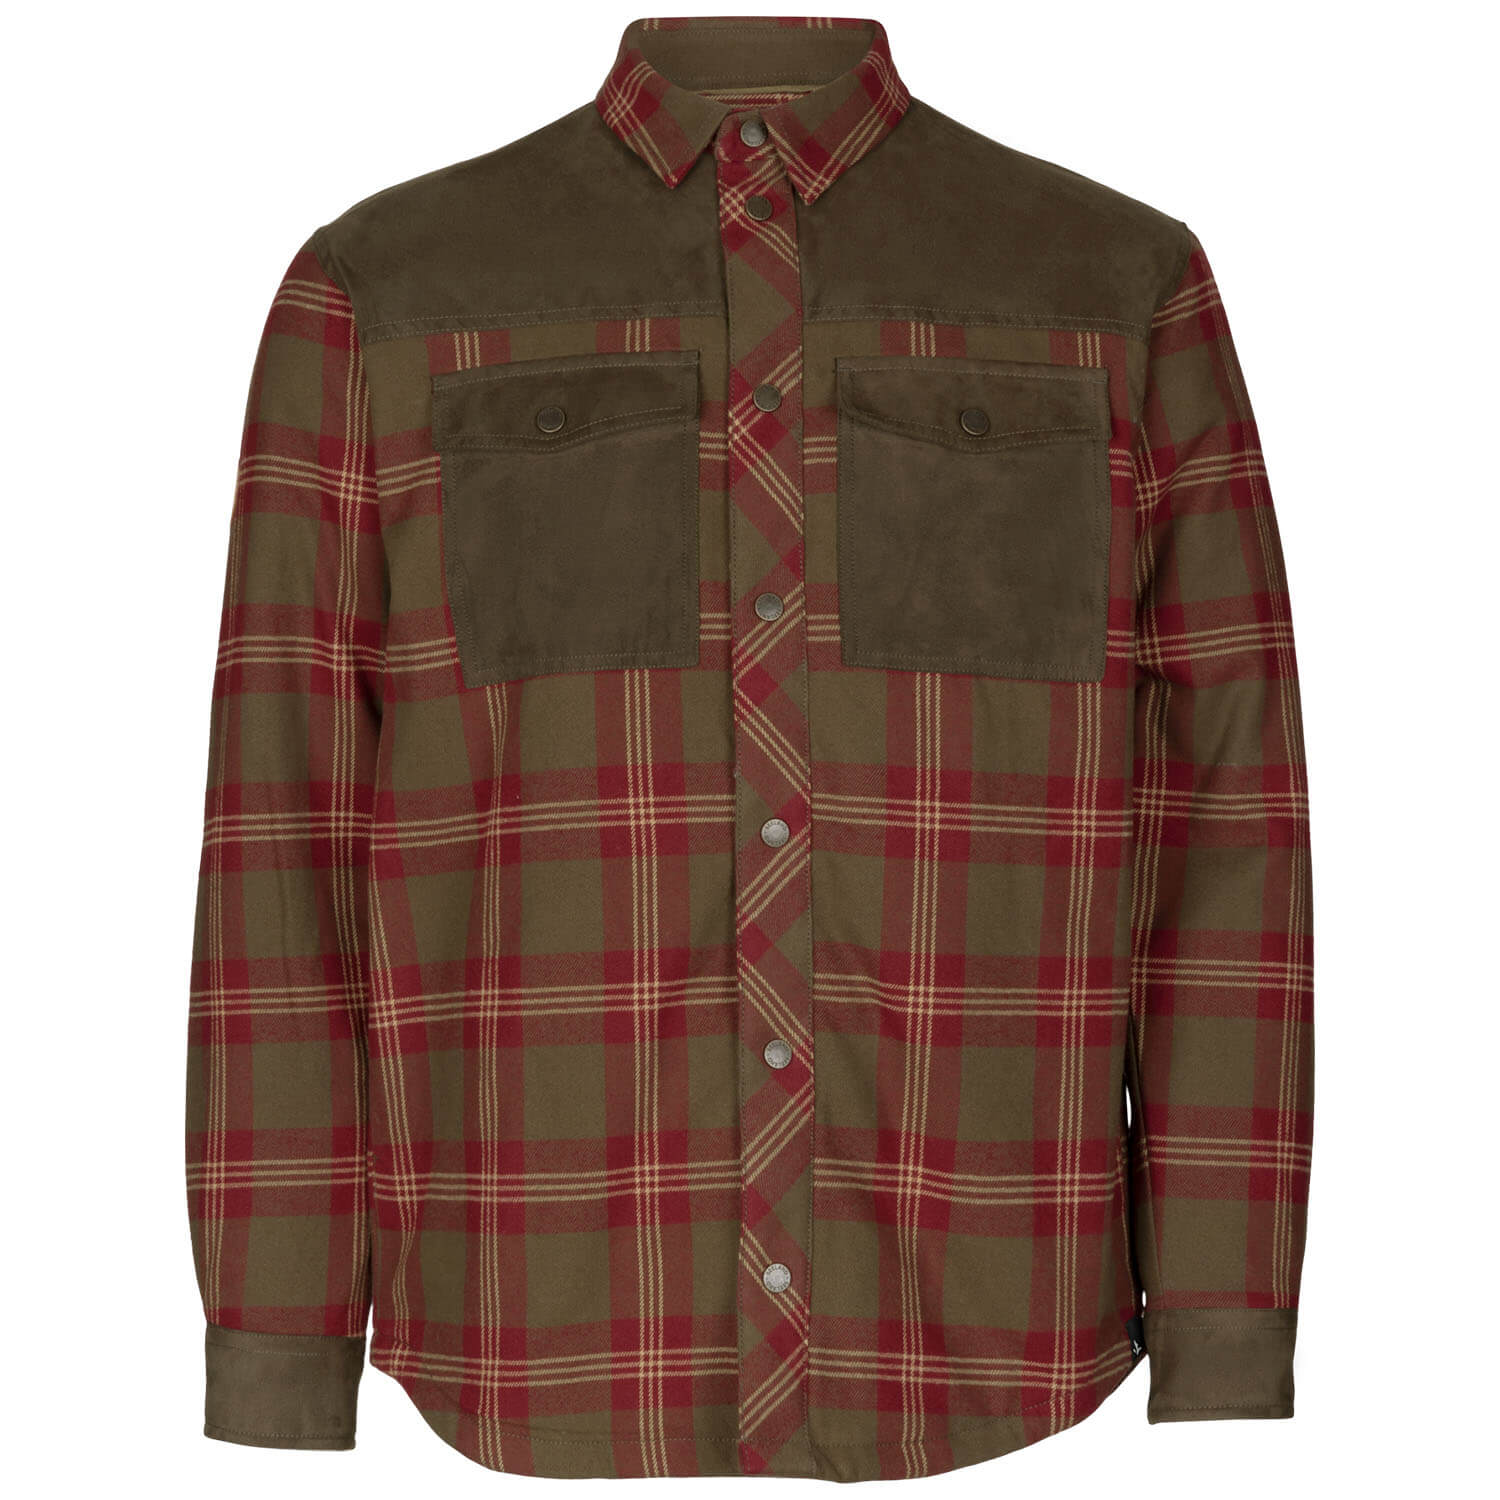 Seeland Shirtjacket Vancouver (red check)